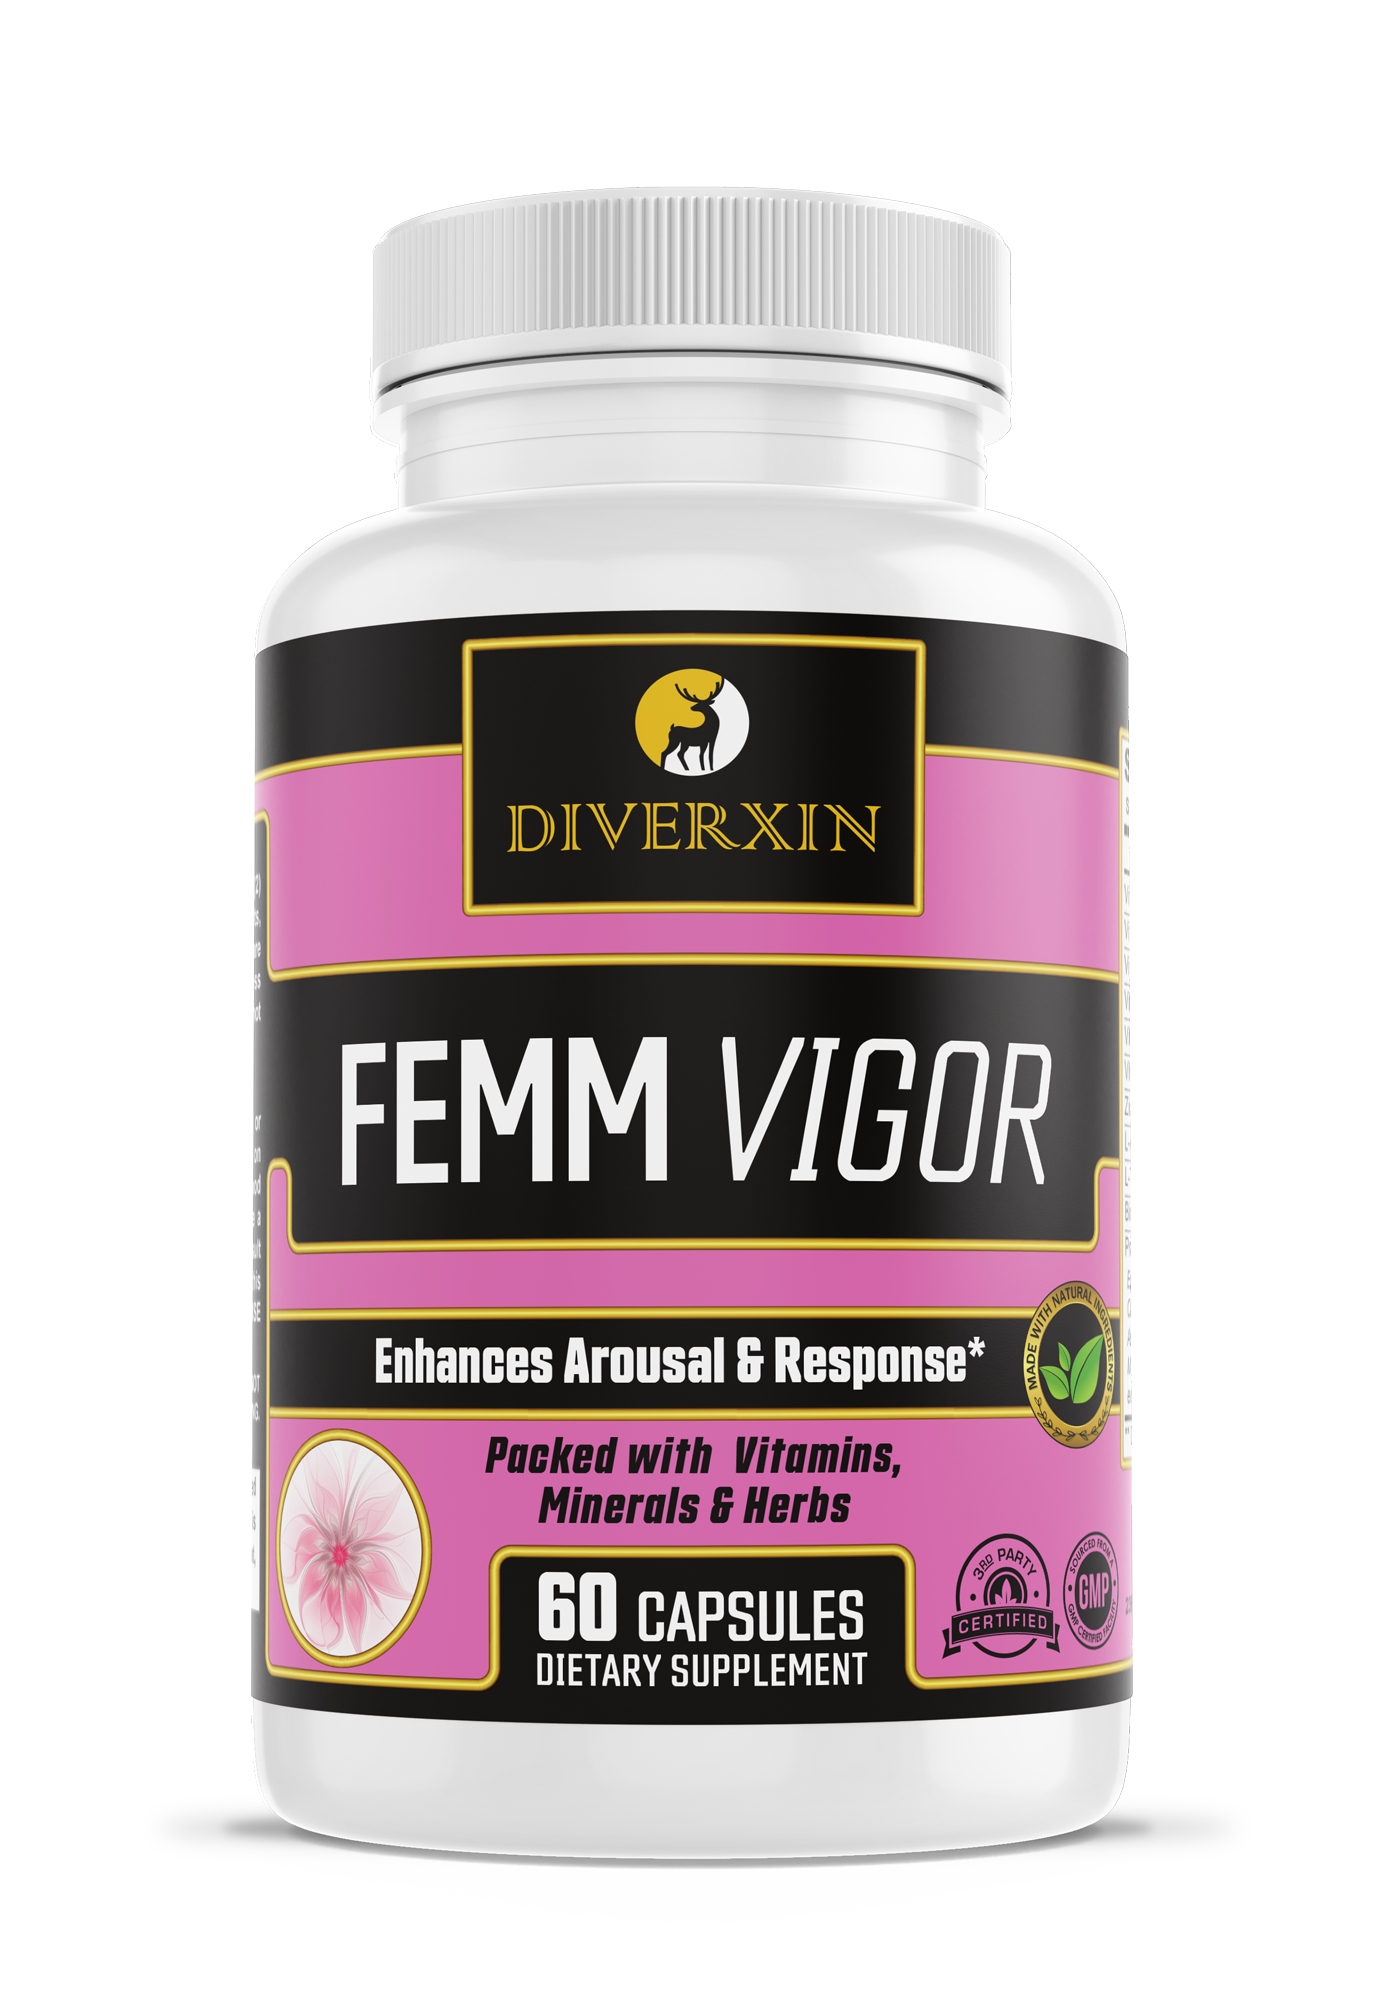 FEMM VIGOR – RED HOT Female Libido Booster Deal with UPSELL thumbnail